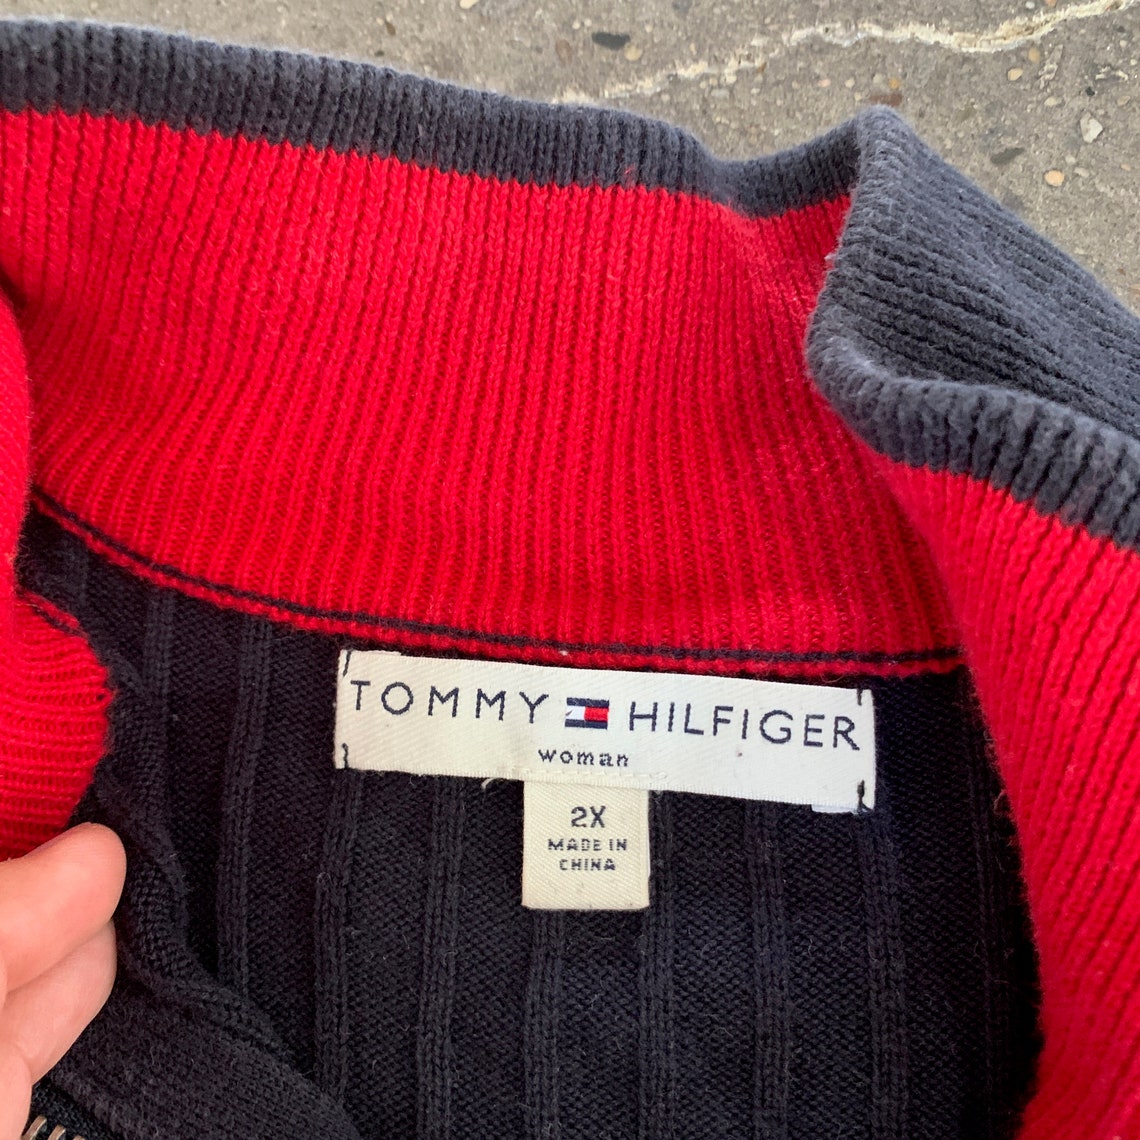 Tommy Hilfiger Oversized Sweater 90s Sweater - Etsy